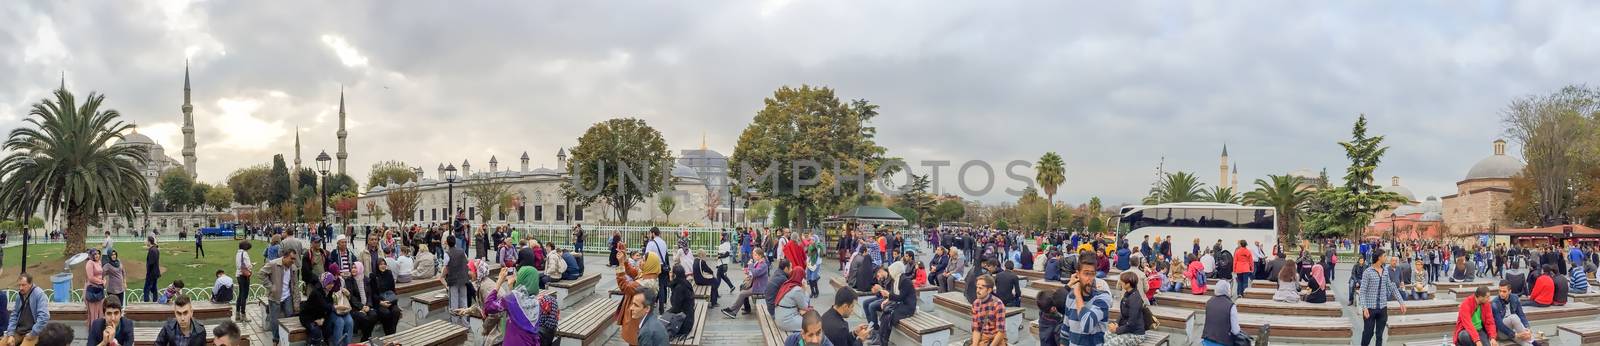 ISTANBUL - SEPTEMBER 21, 2014: Tourists enjoy city life in Sulta by jovannig